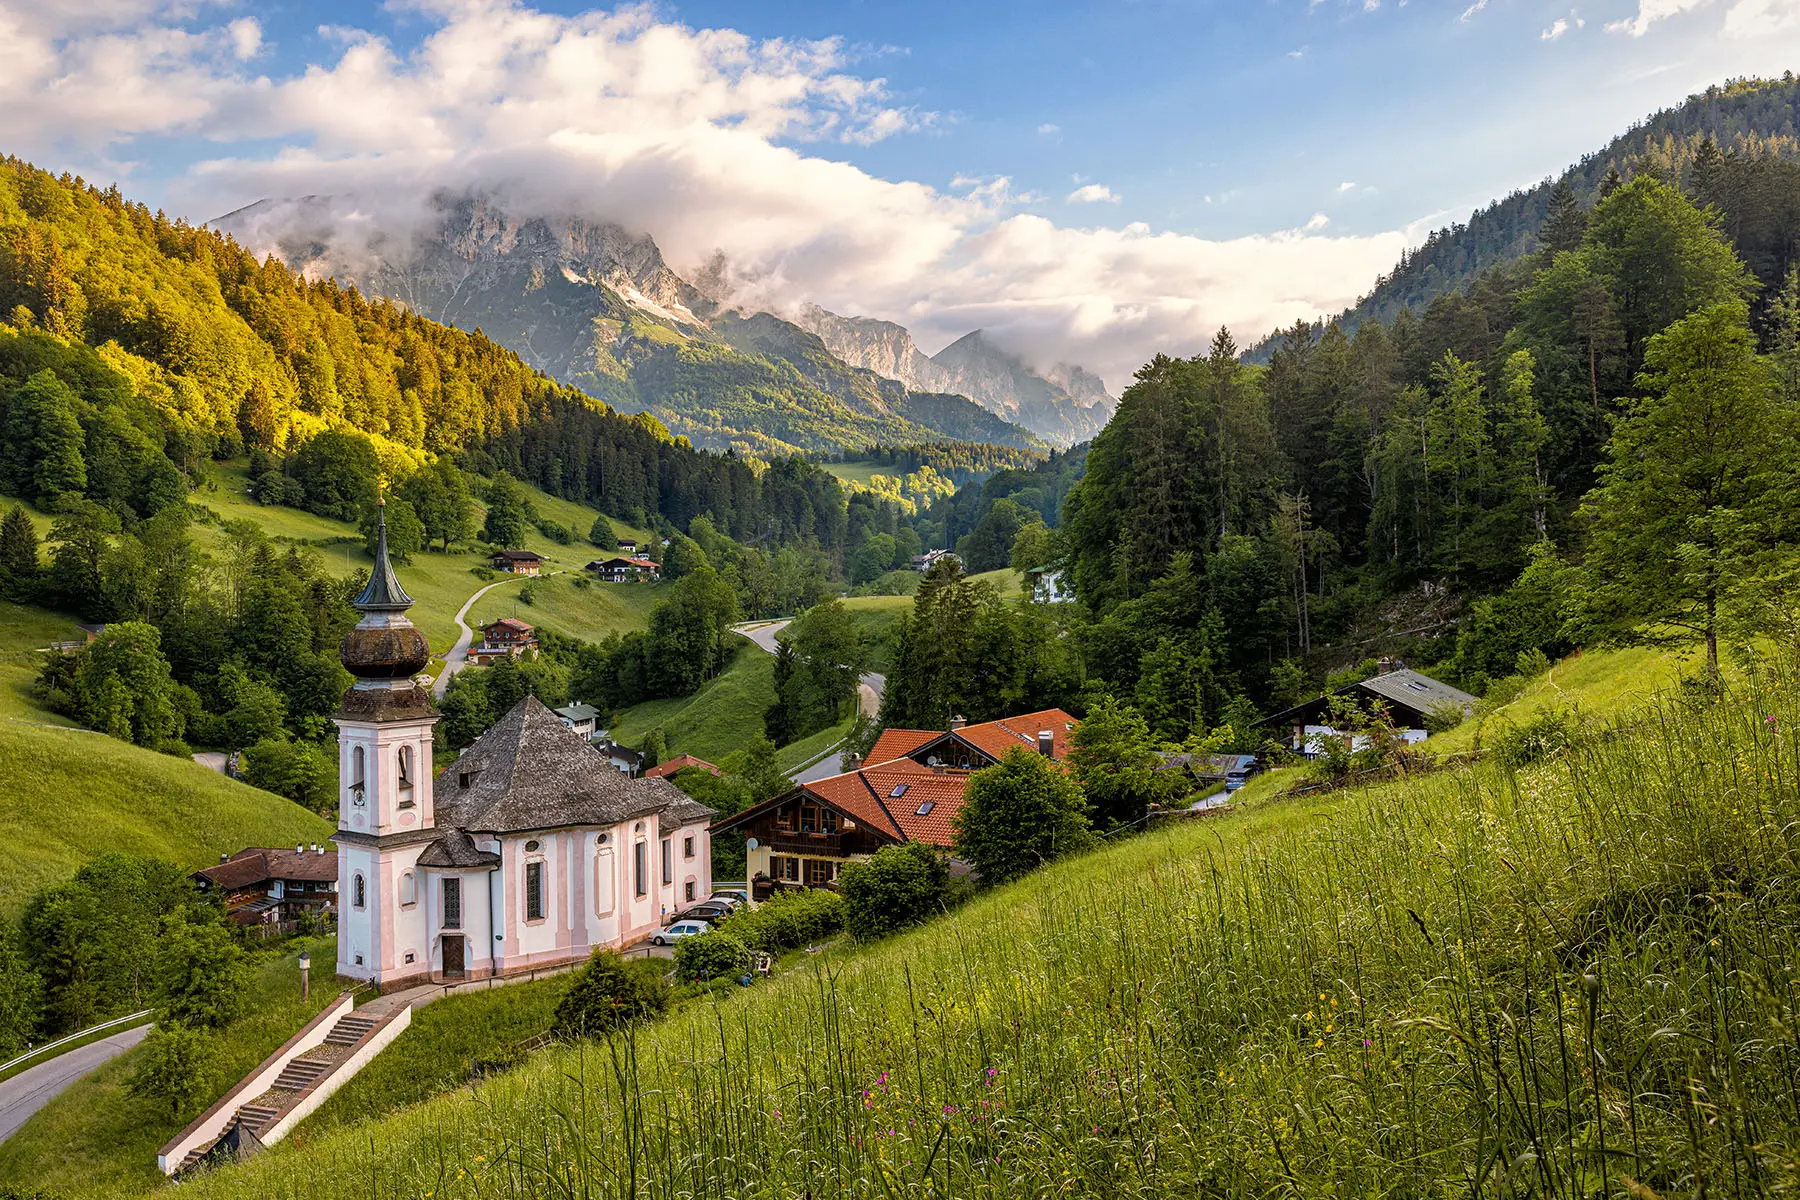 Church Maria Gern on the green slopes of Bavaria with Mt. Untersberg in the background